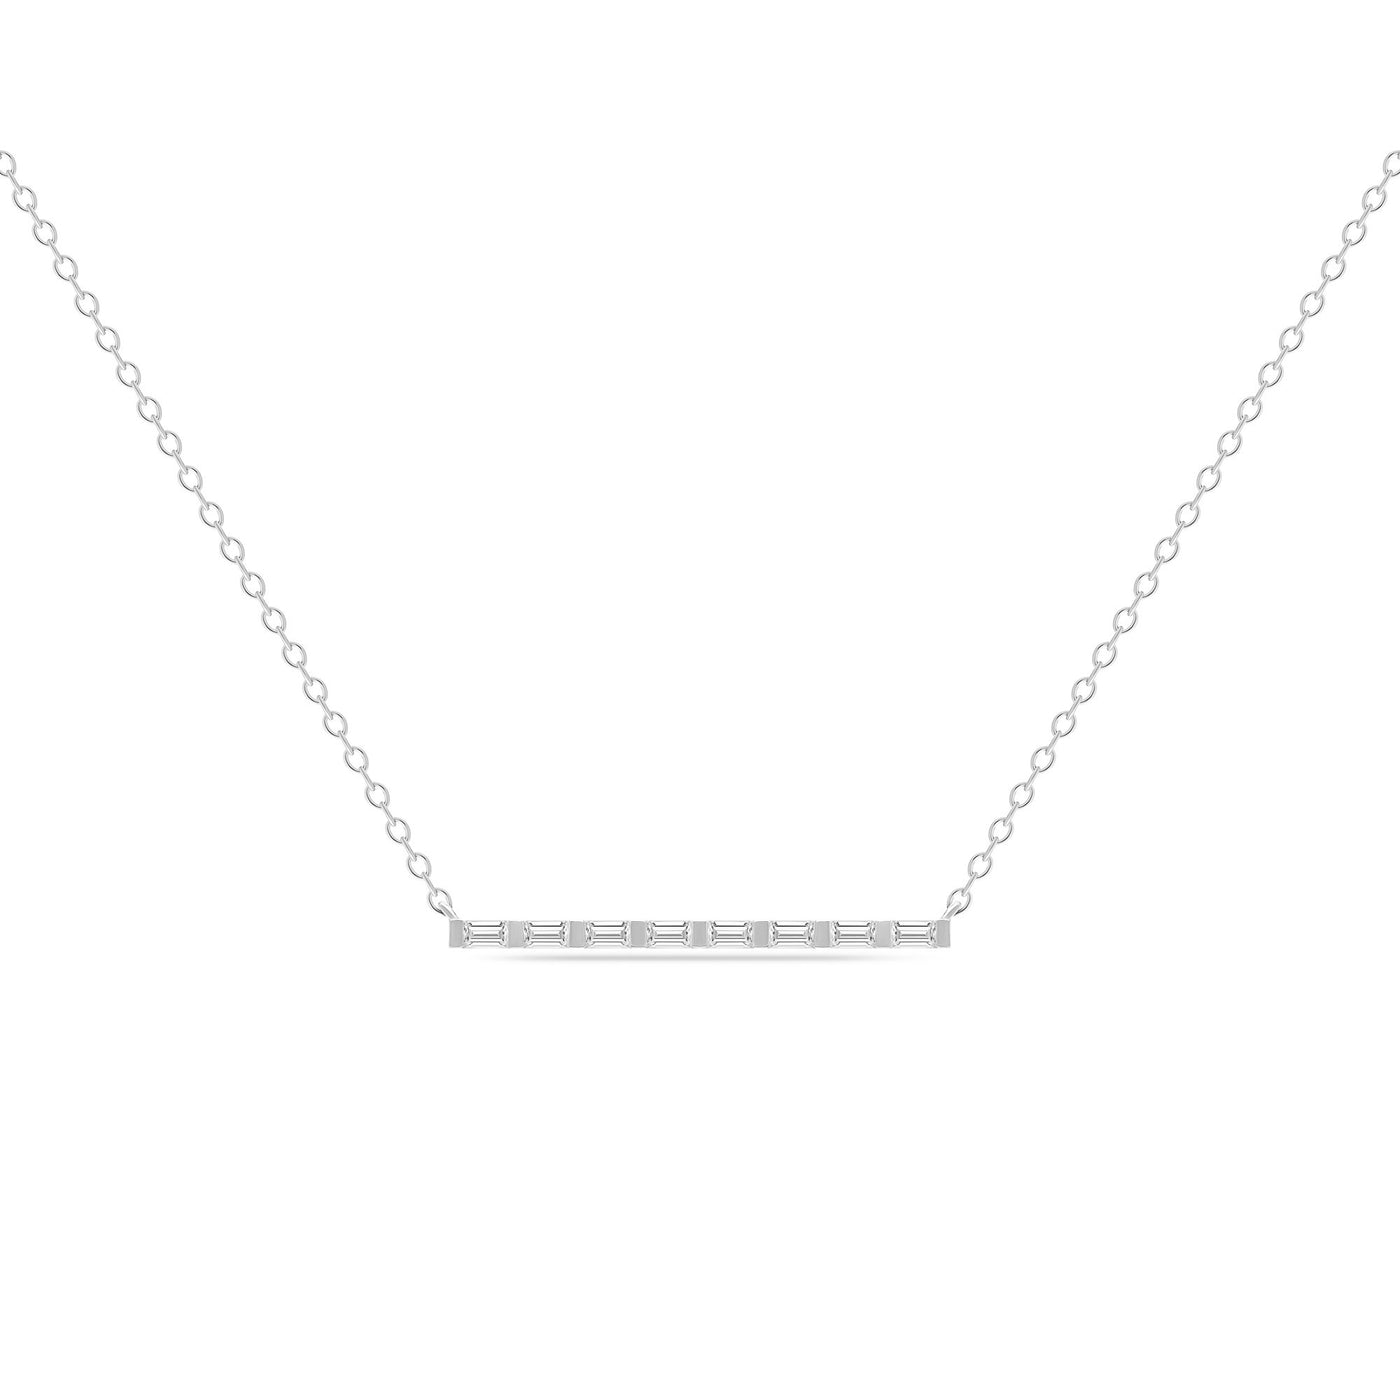 14K Solid White Gold All Baguette Diamond Tension Bar Necklace